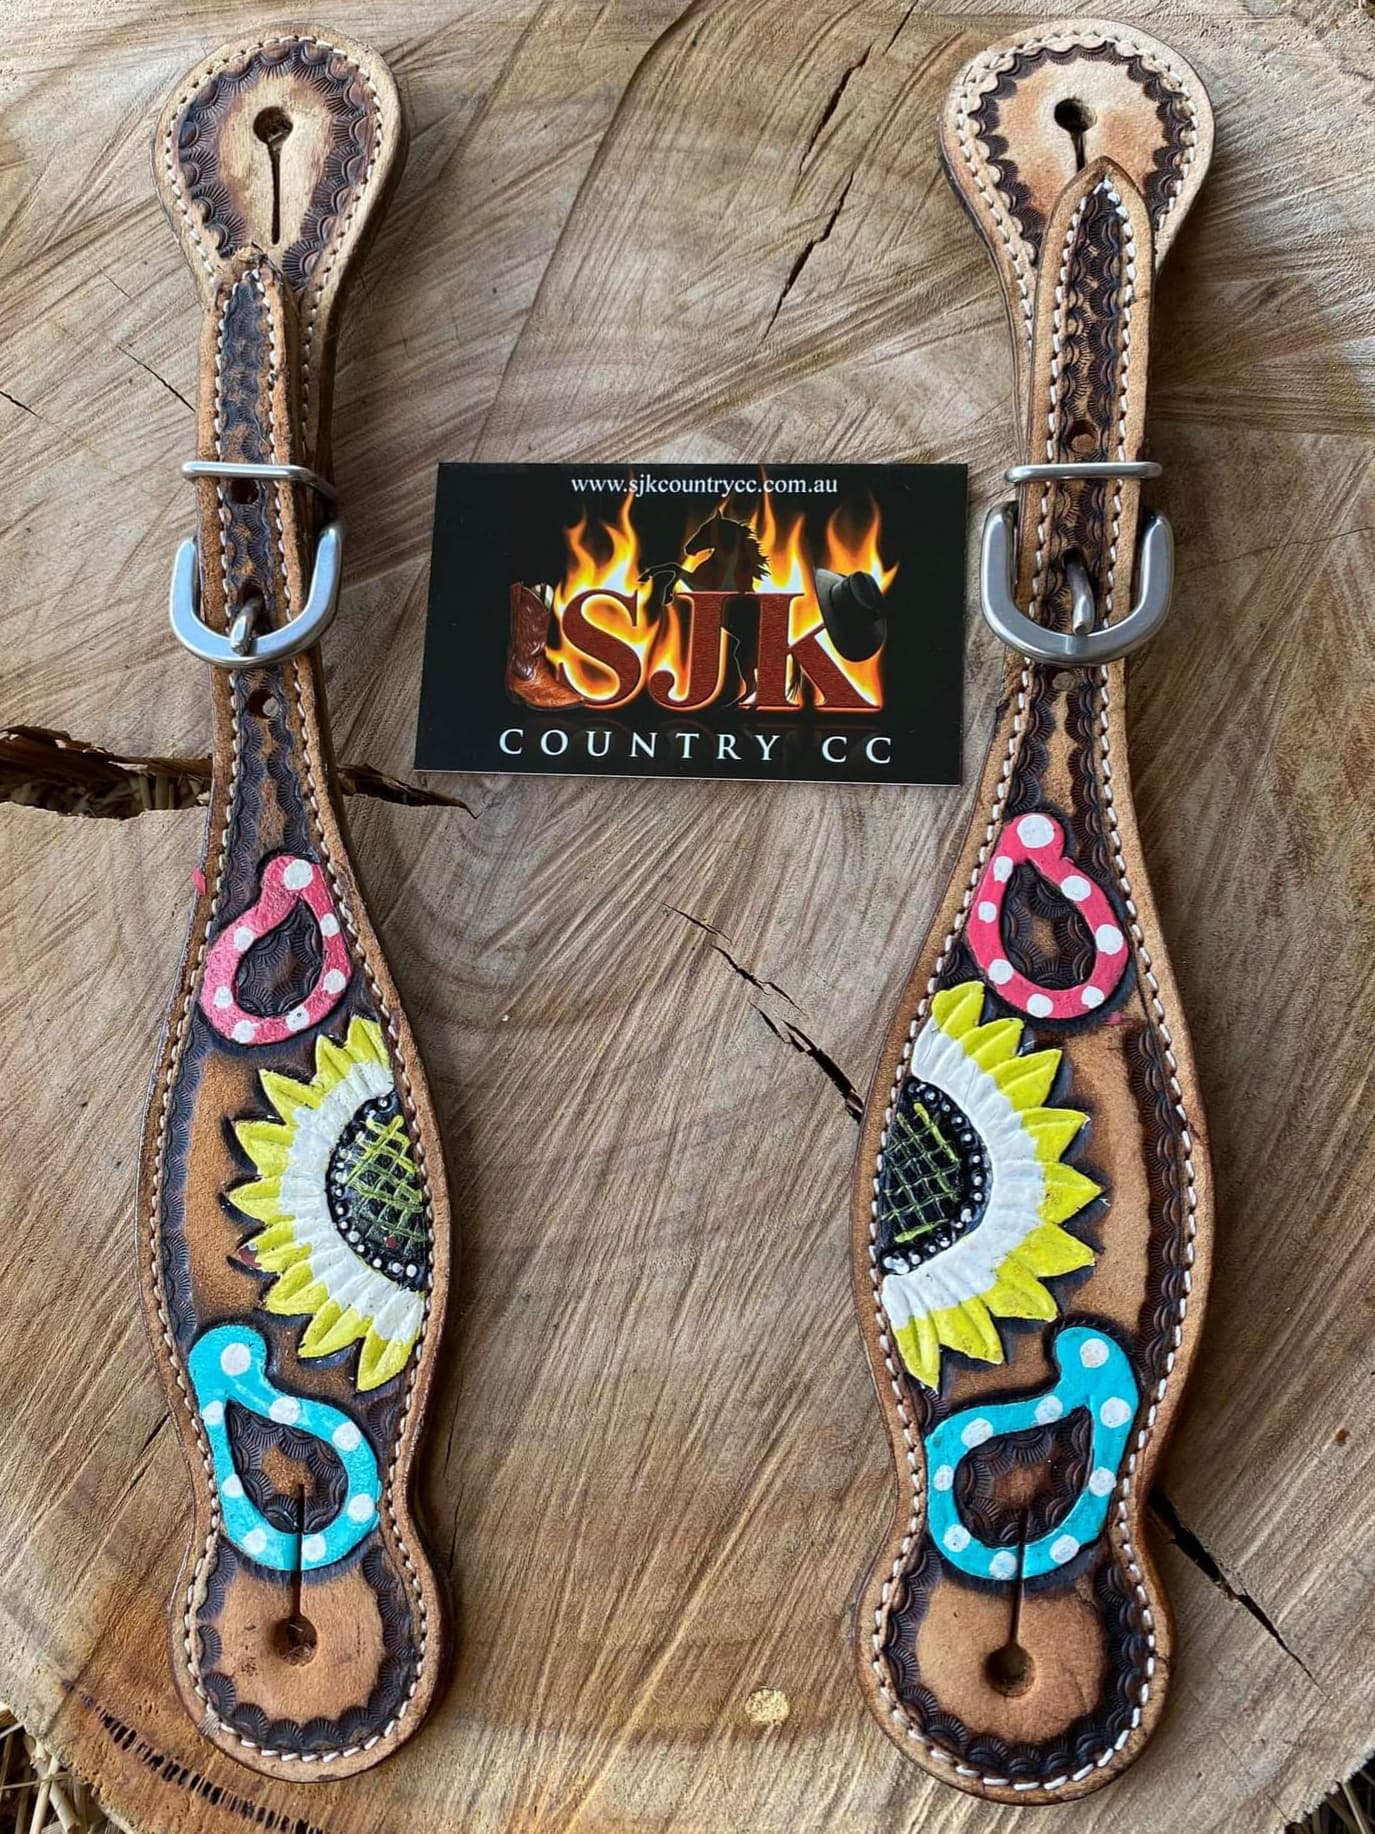 Strap - Ladies Hand Painted Leather Spur Strap